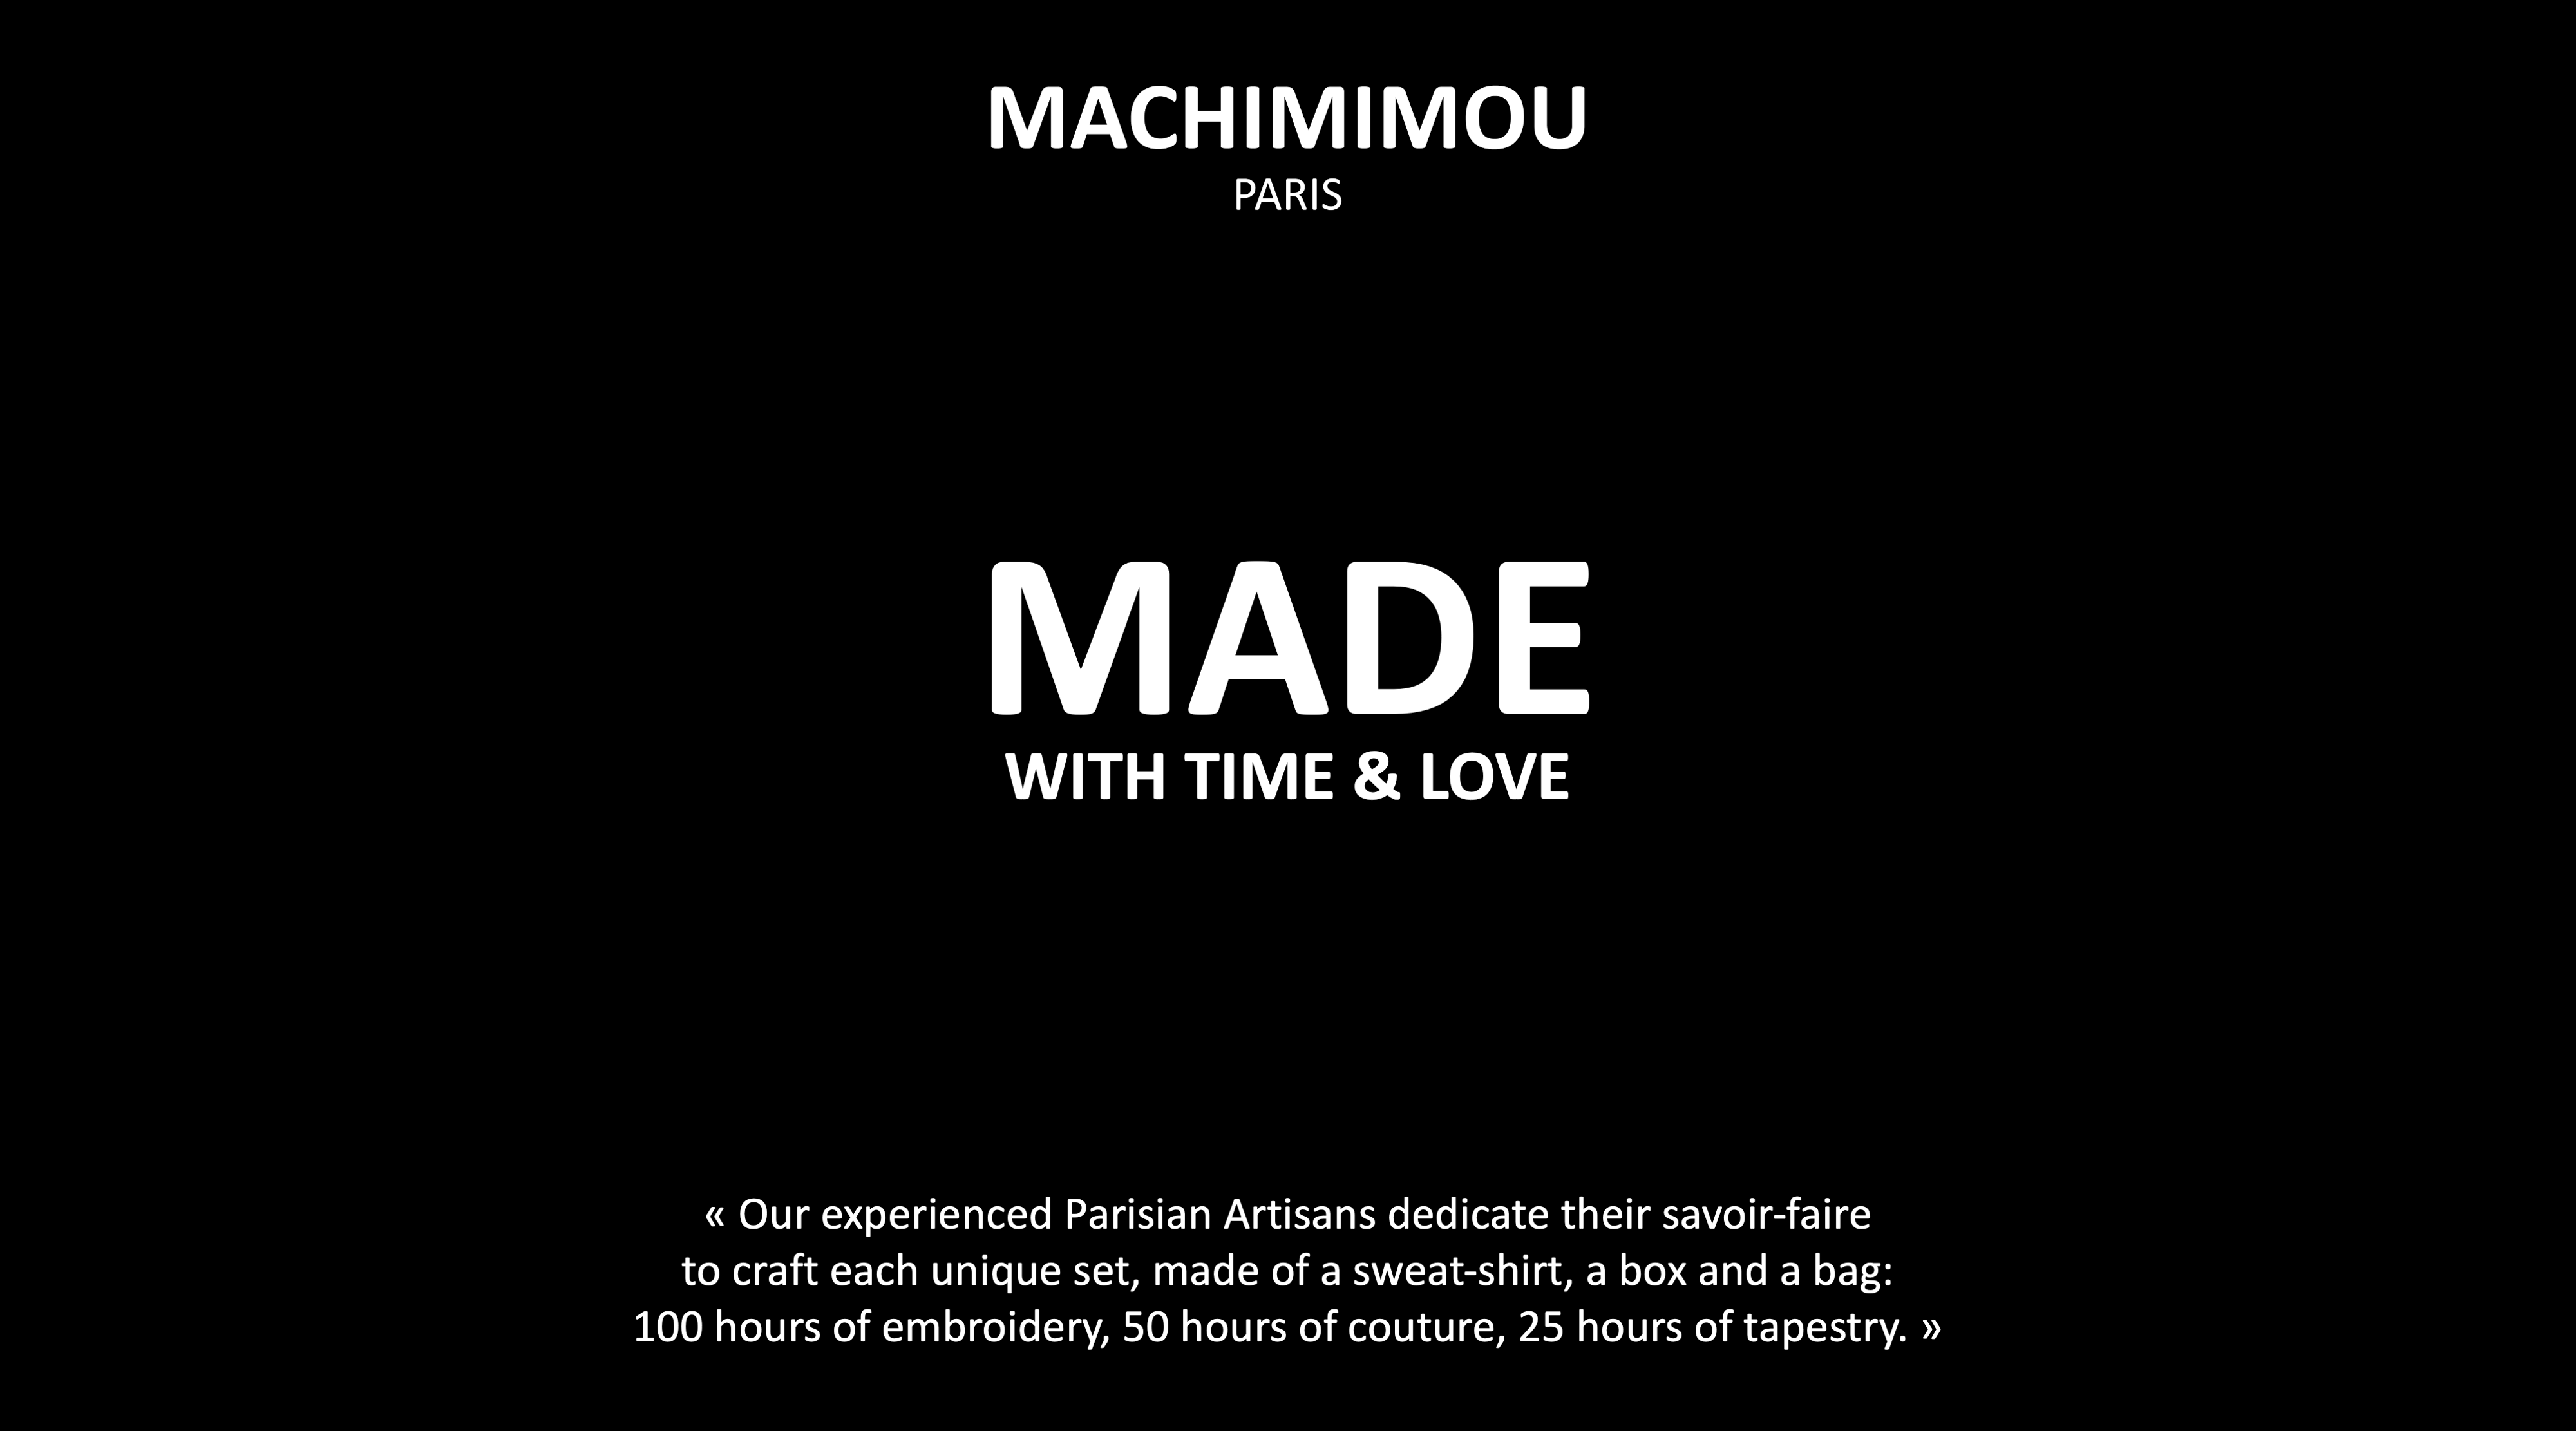 MACHIMIMOU PARIS - Made with Time and Love